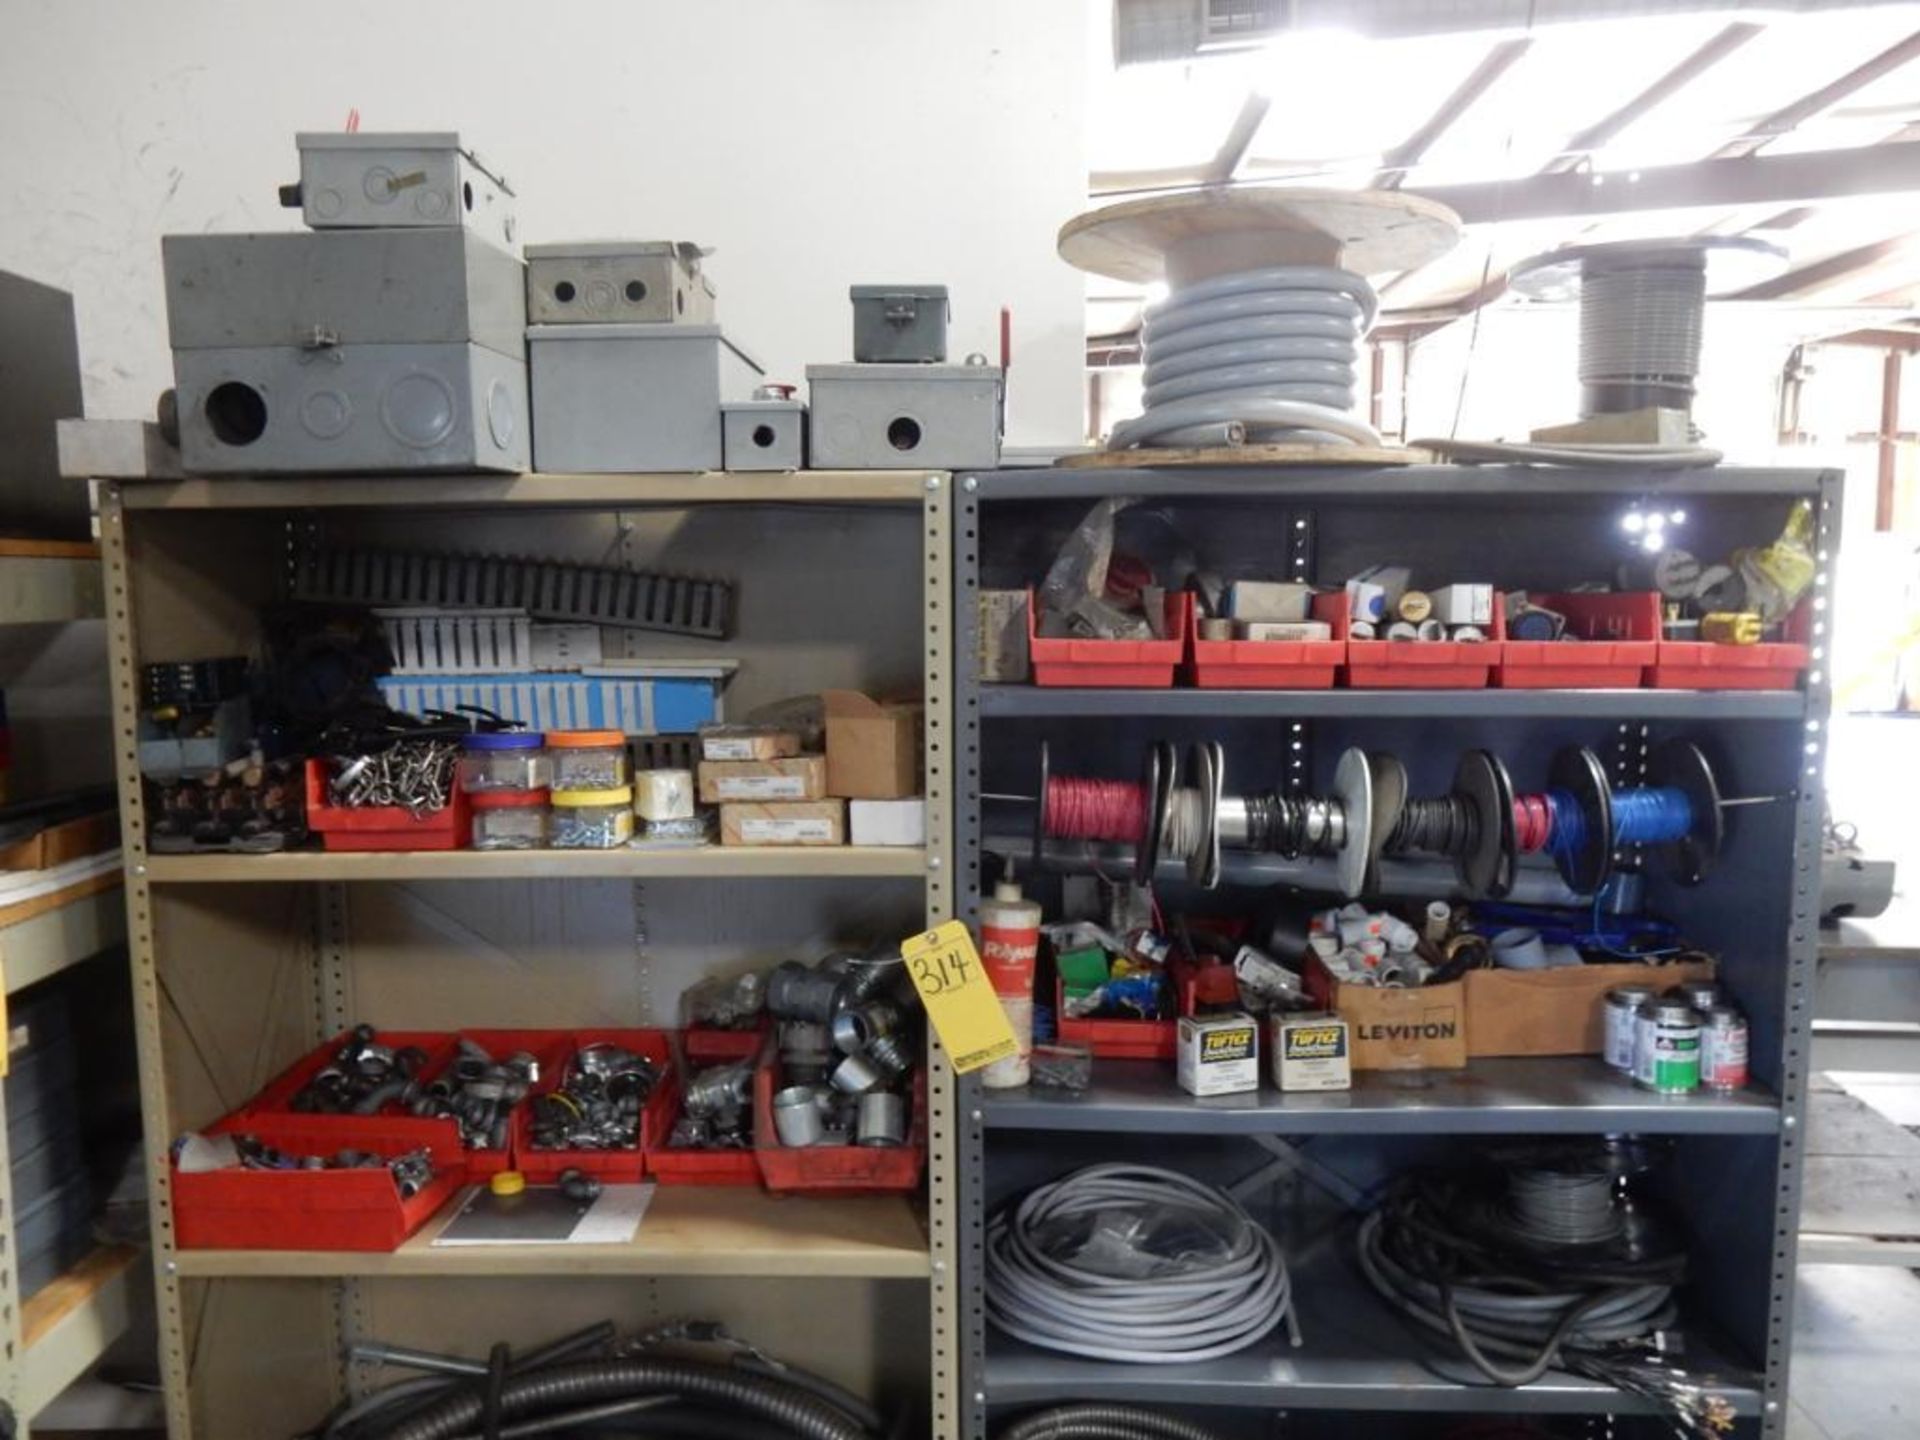 LOT (2) ADJ. SHELVES W/CONTENTS - CONDUIT FITTINGS, WIRE, ELECTRICAL BOXES, ETC. - Image 2 of 3